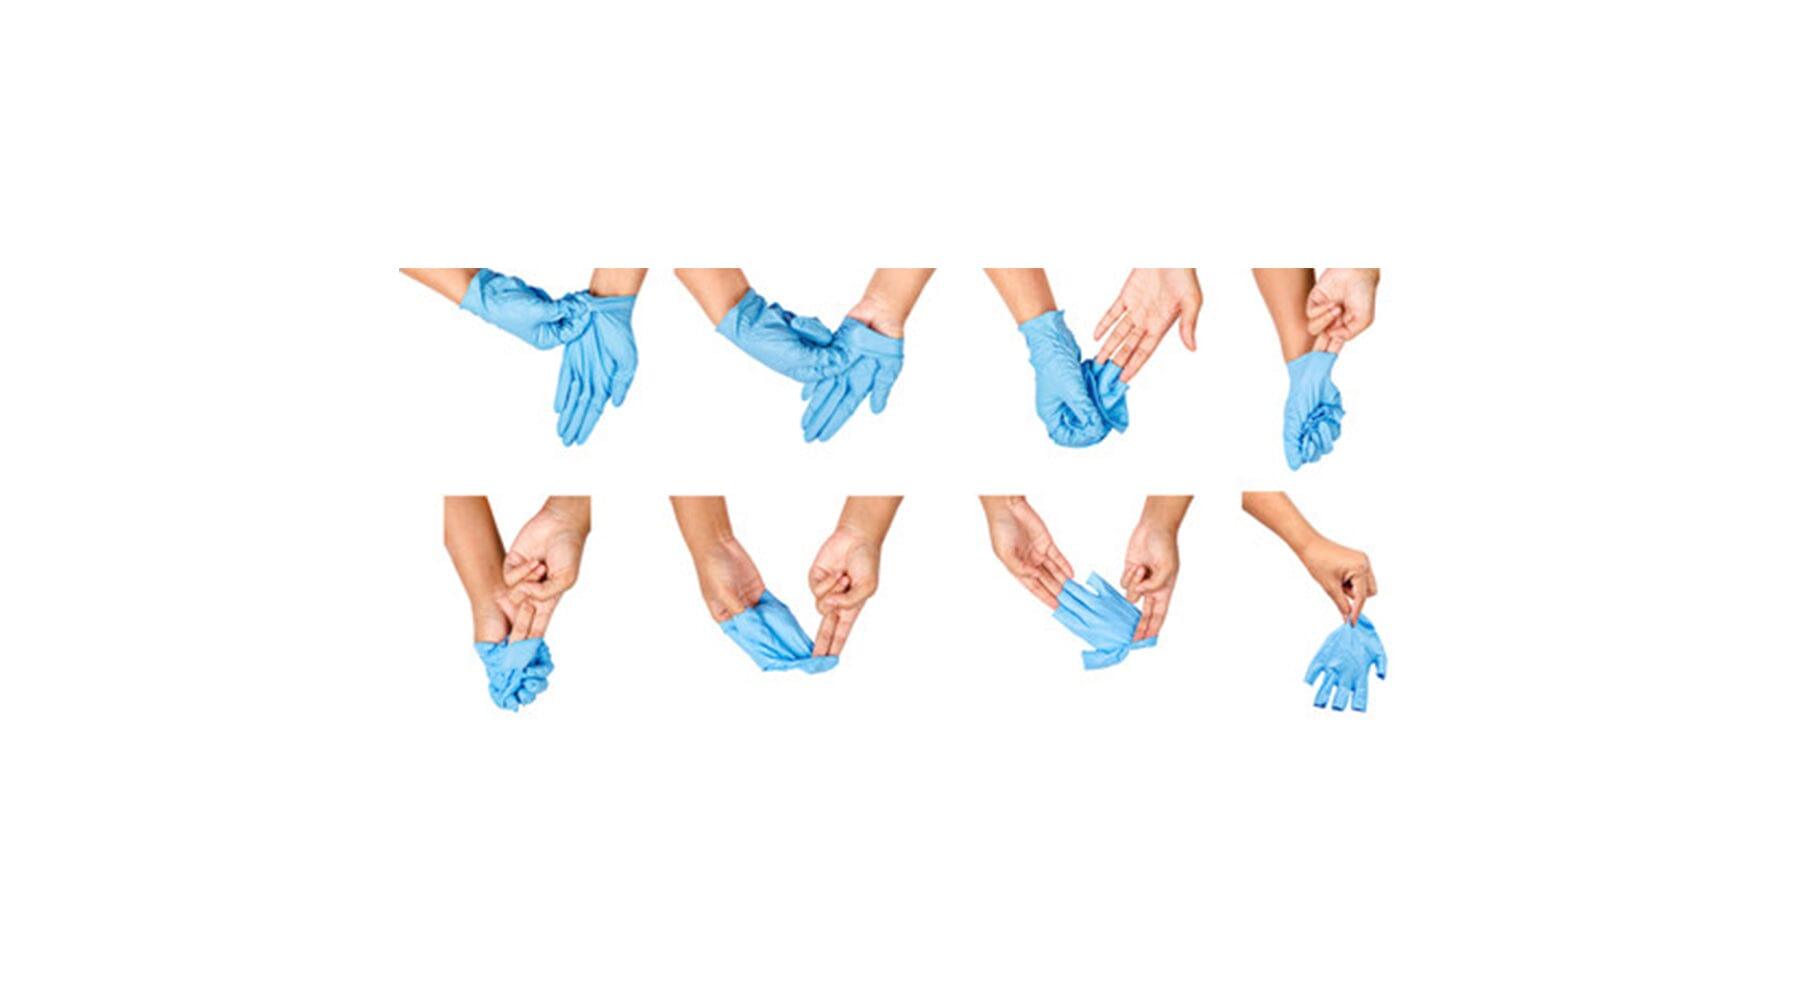 How to Properly Wear Disposable Gloves